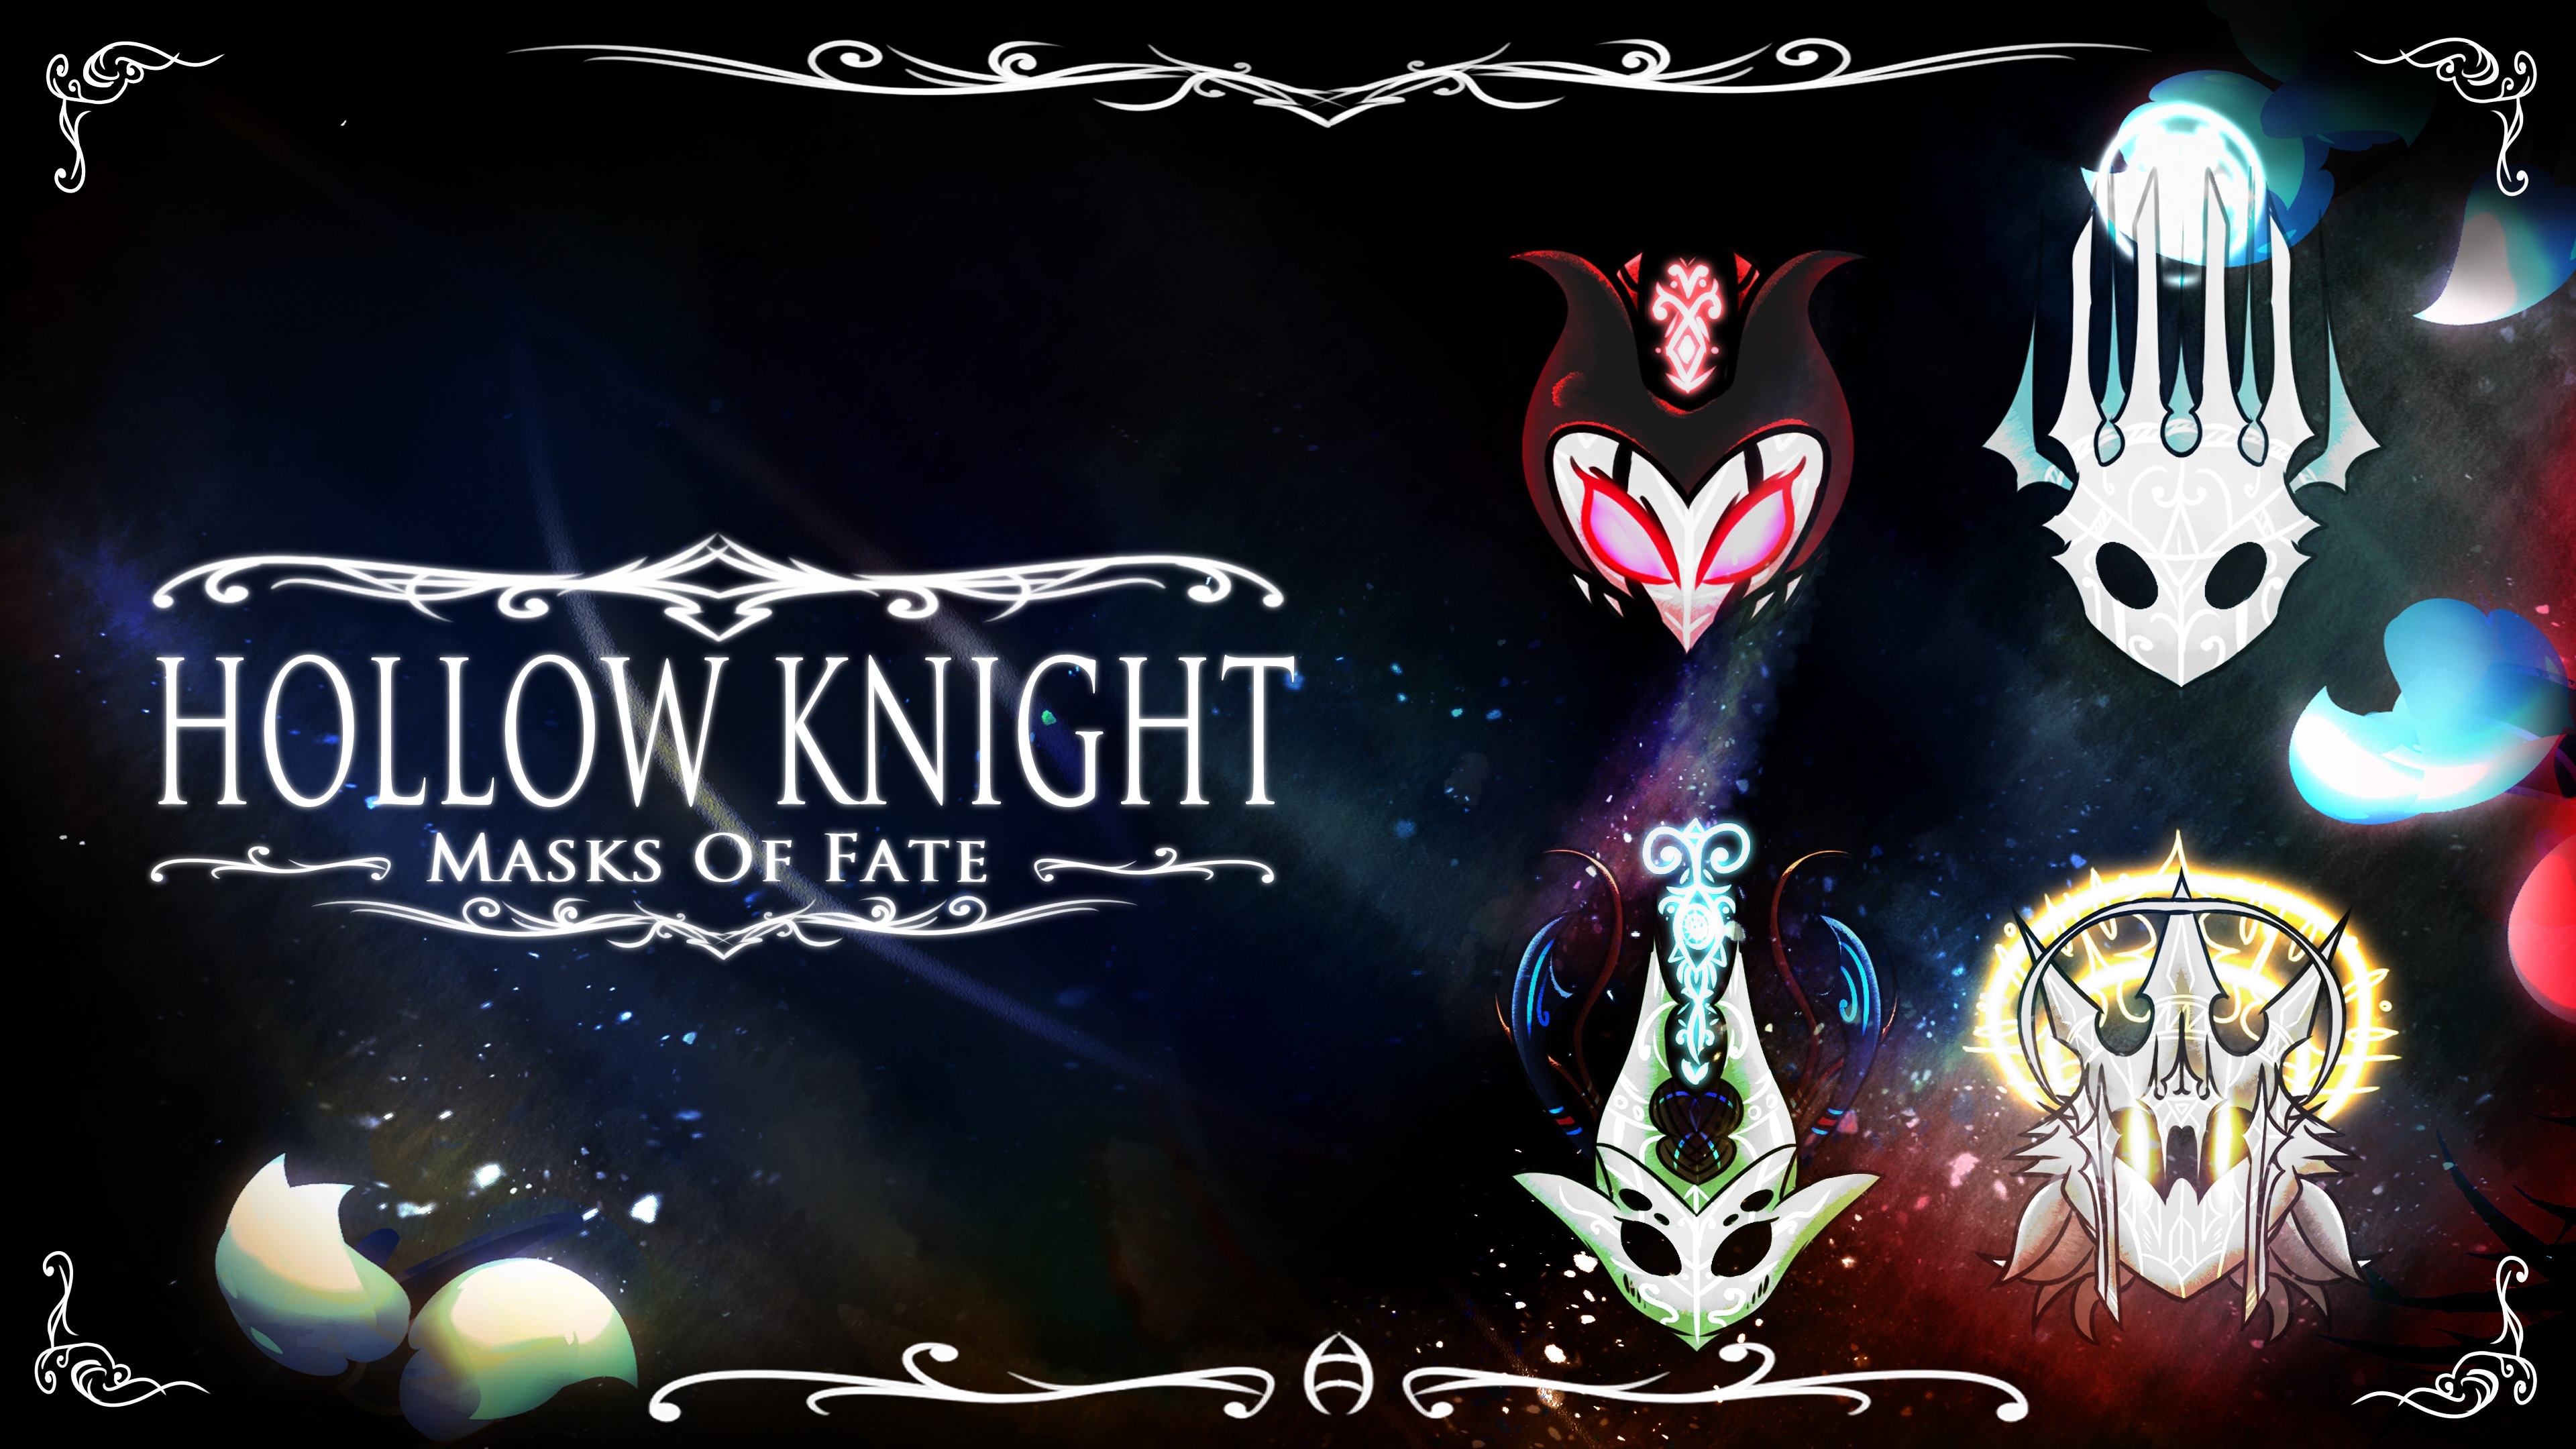 Hollow Knight: Masks of Fate